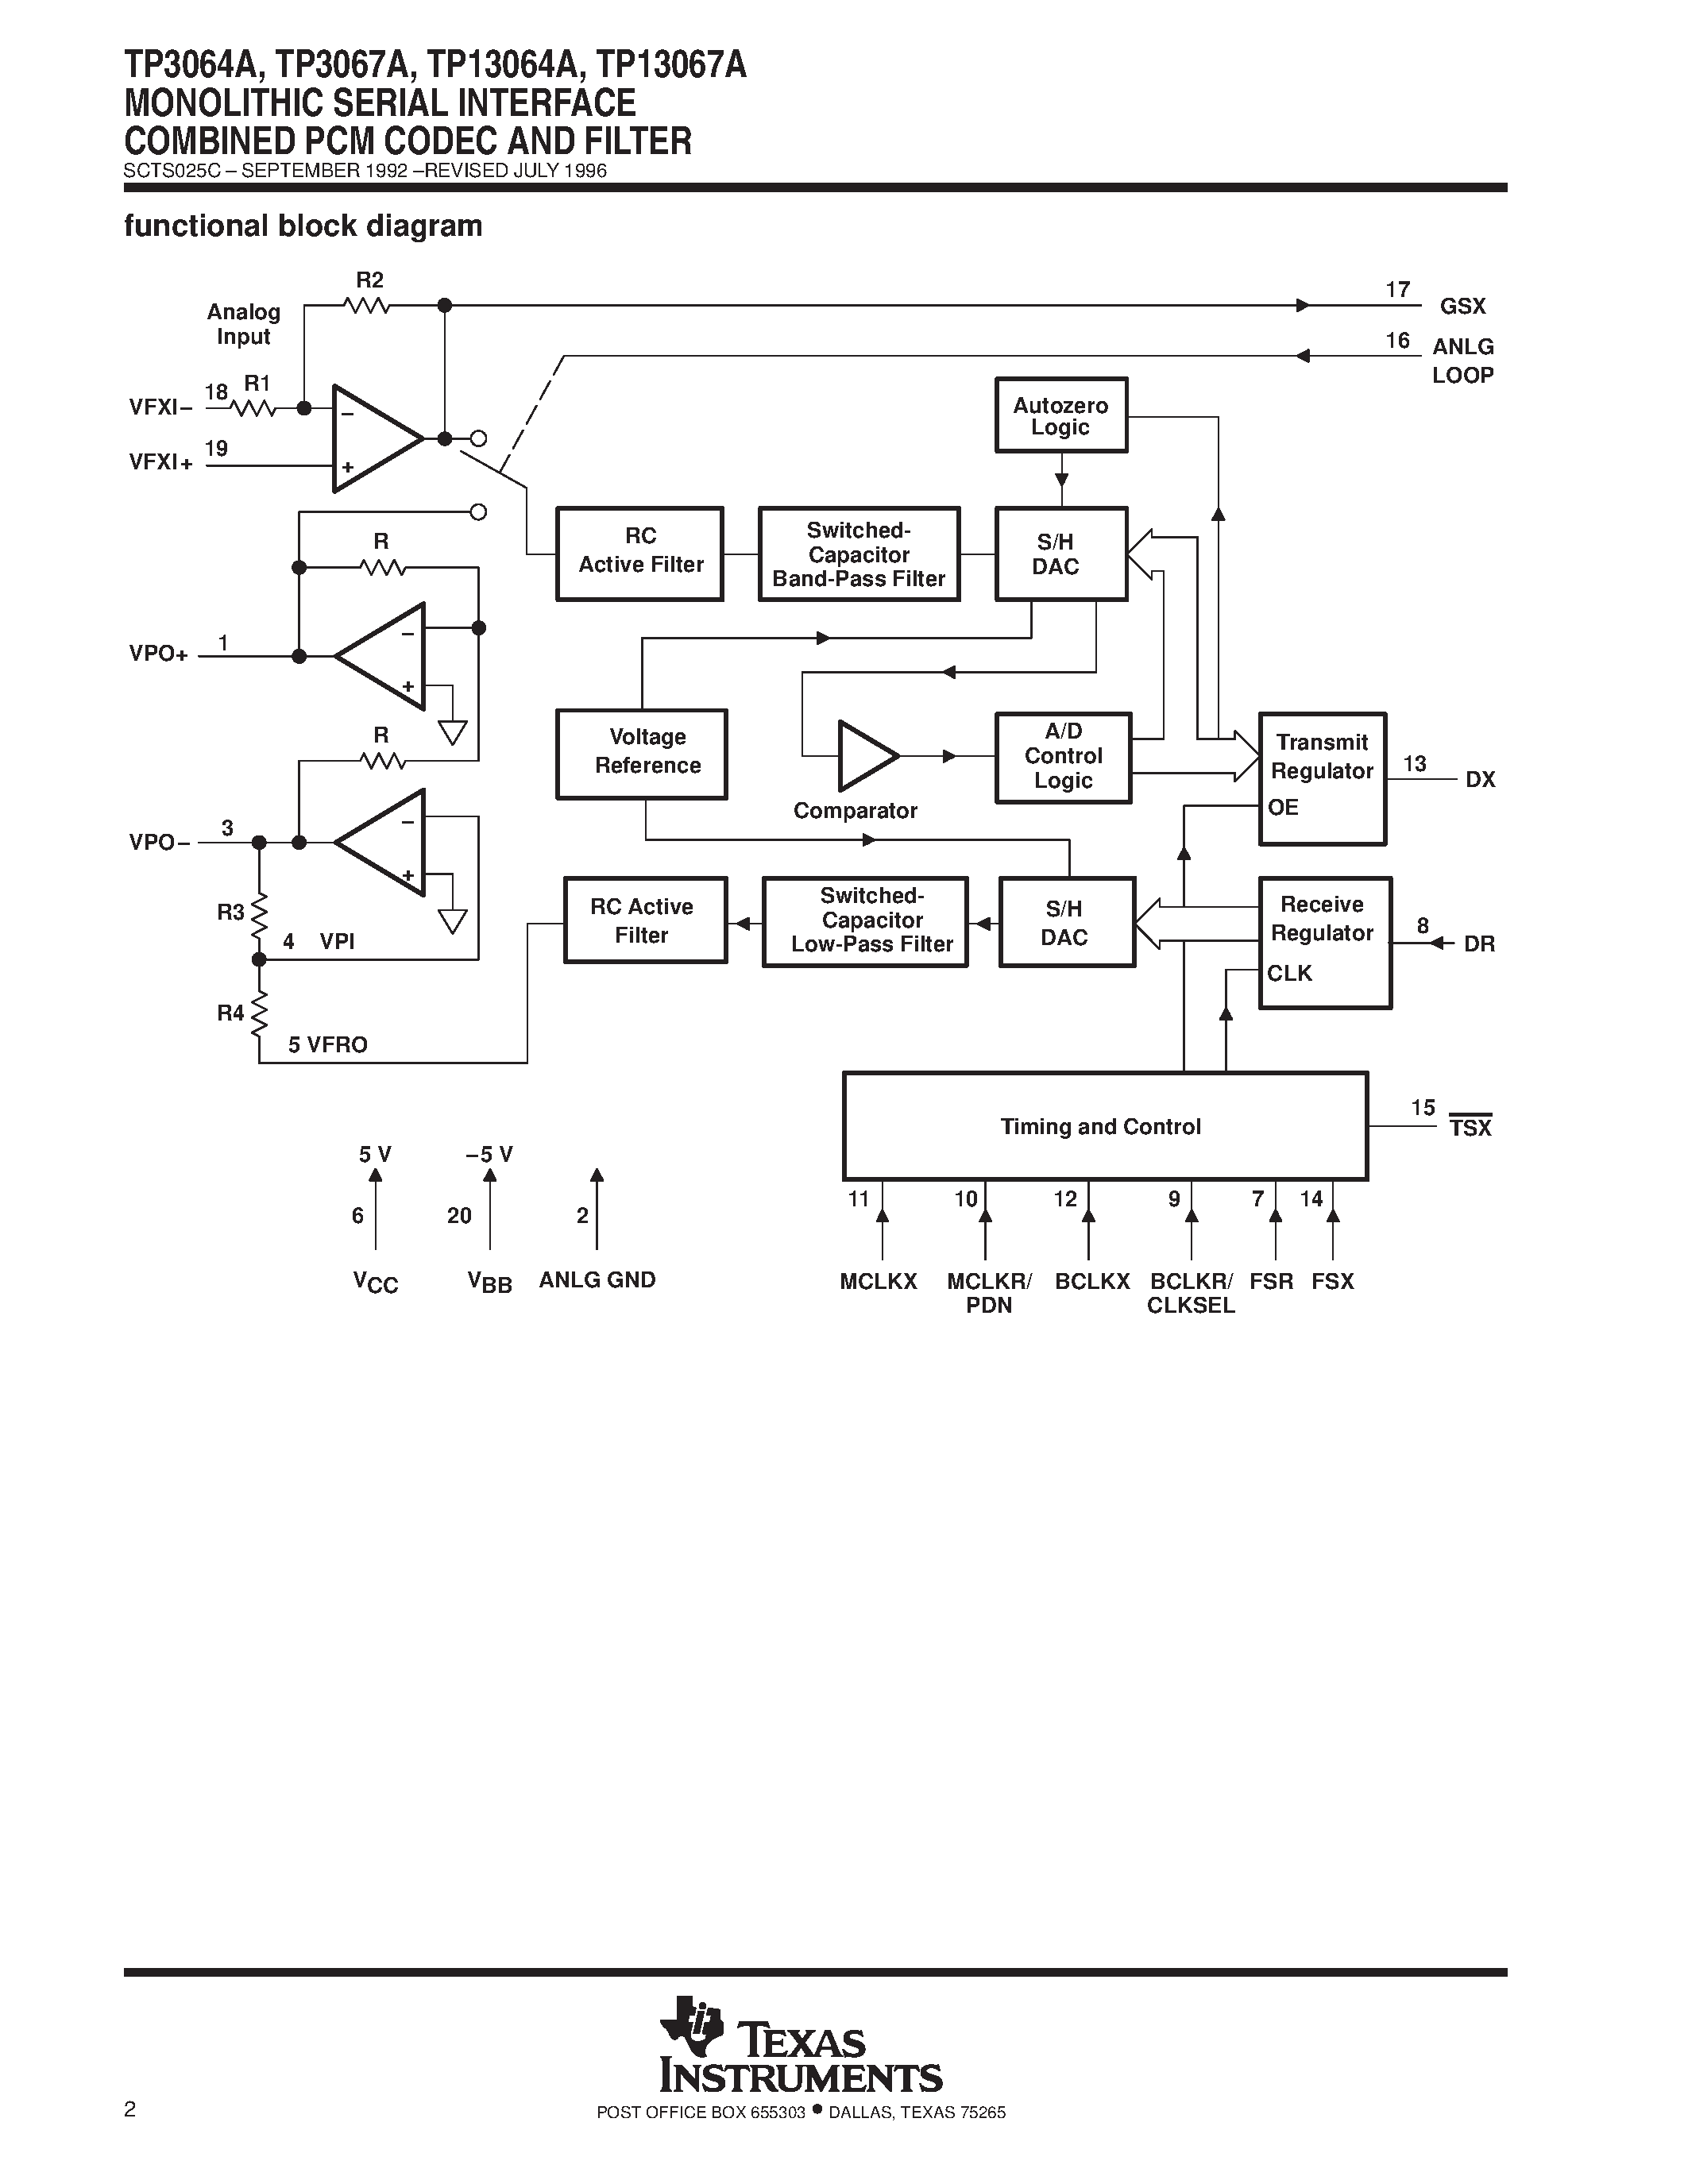 Datasheet TP13064A - MONOLITHIC SERIAL INTERFACE COMBINED PCM CODEC AND FILTER page 2